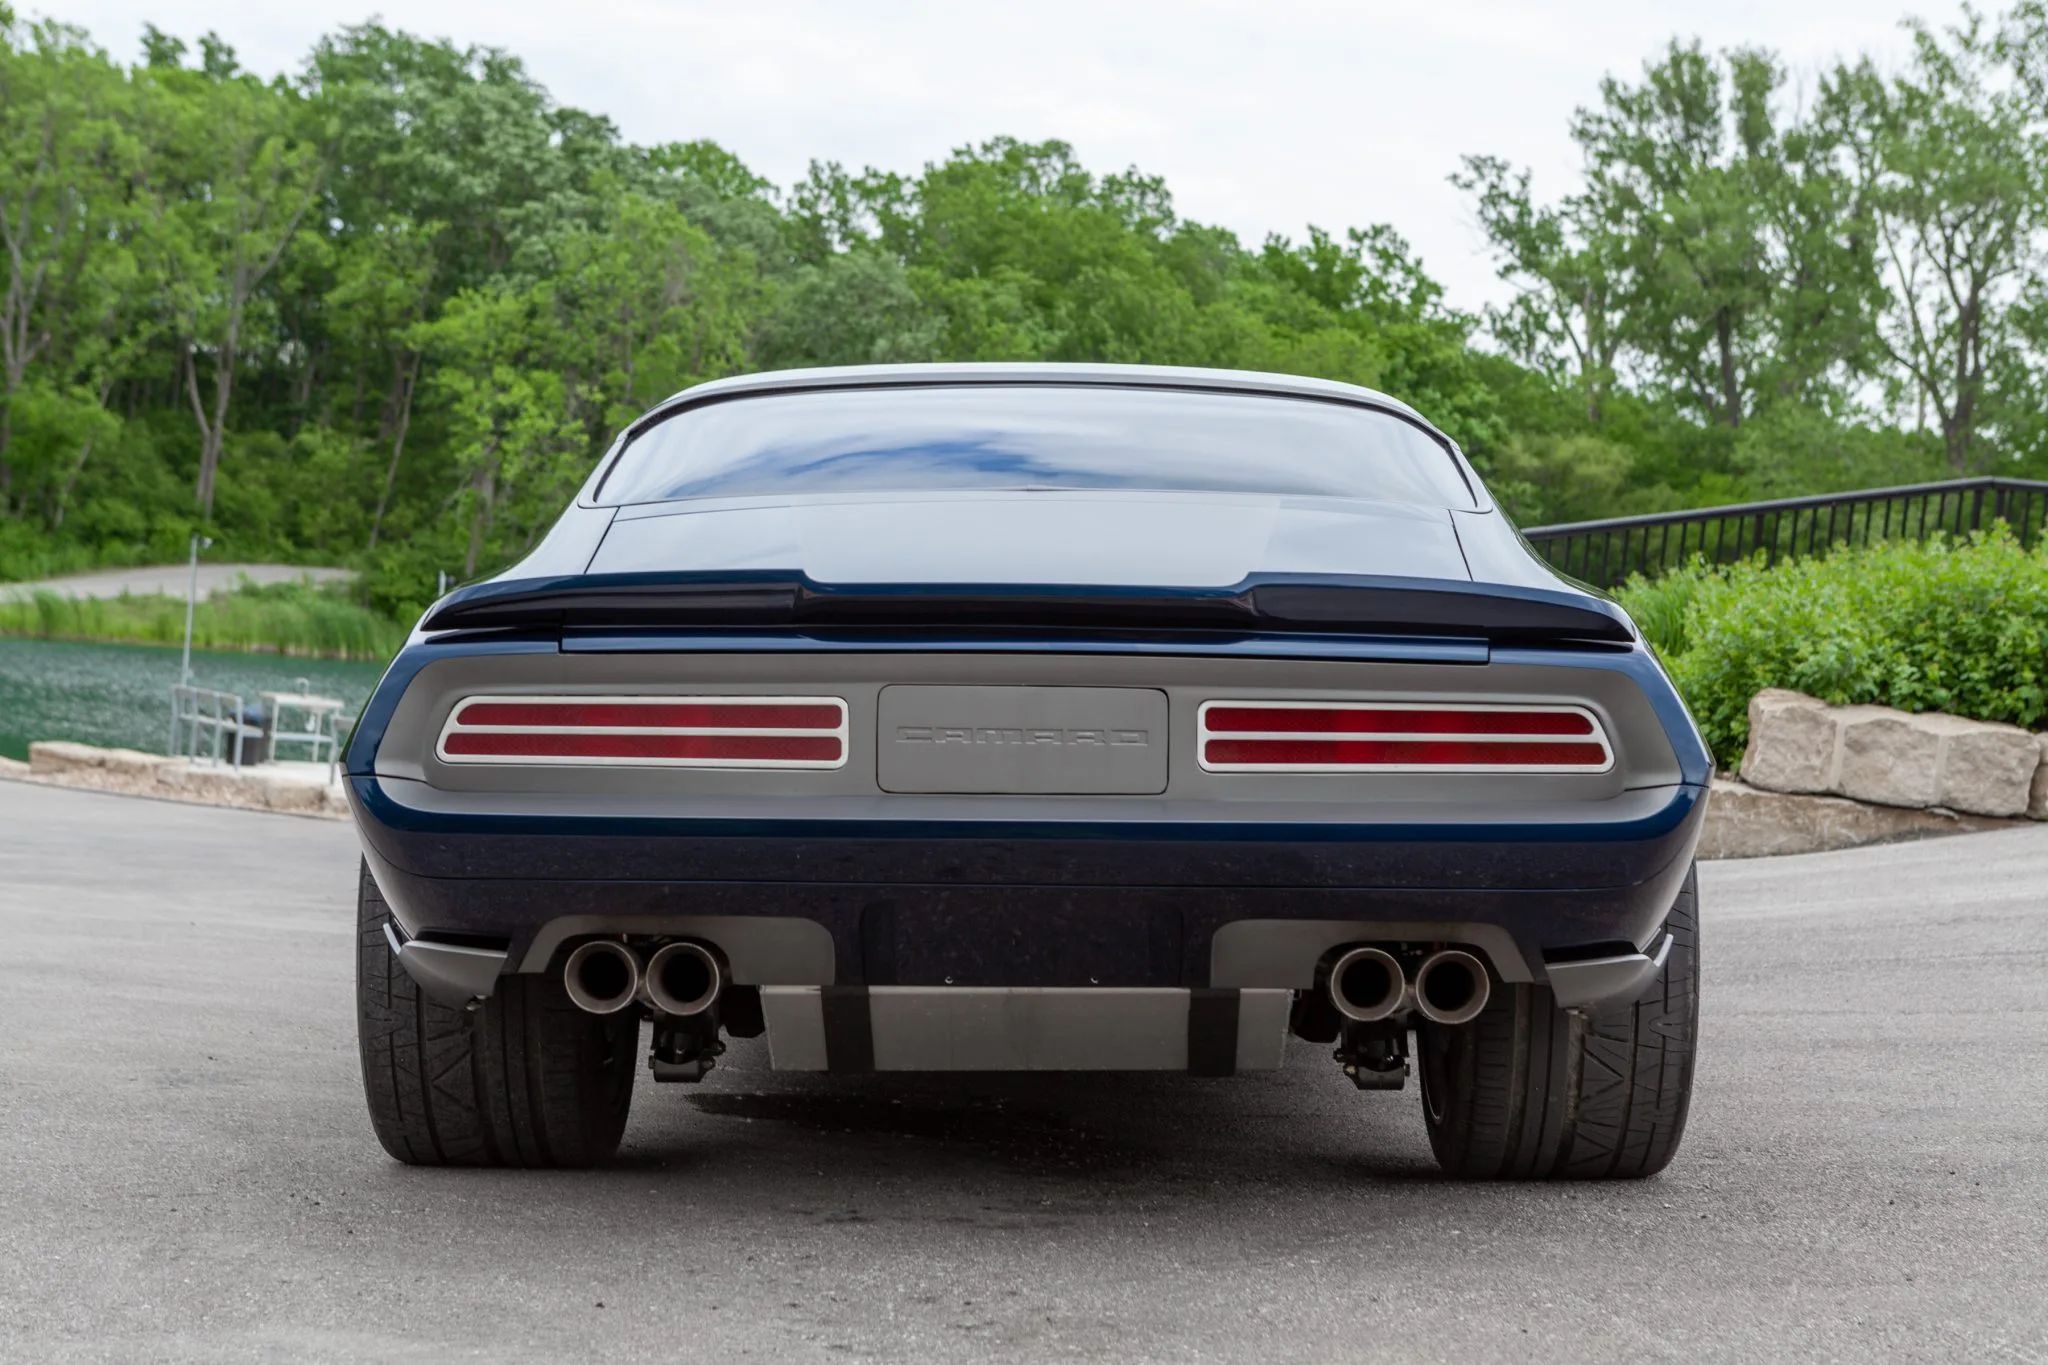 Twin-Turbo 1971 Chevy Camaro Restomod shows what modern cars lack